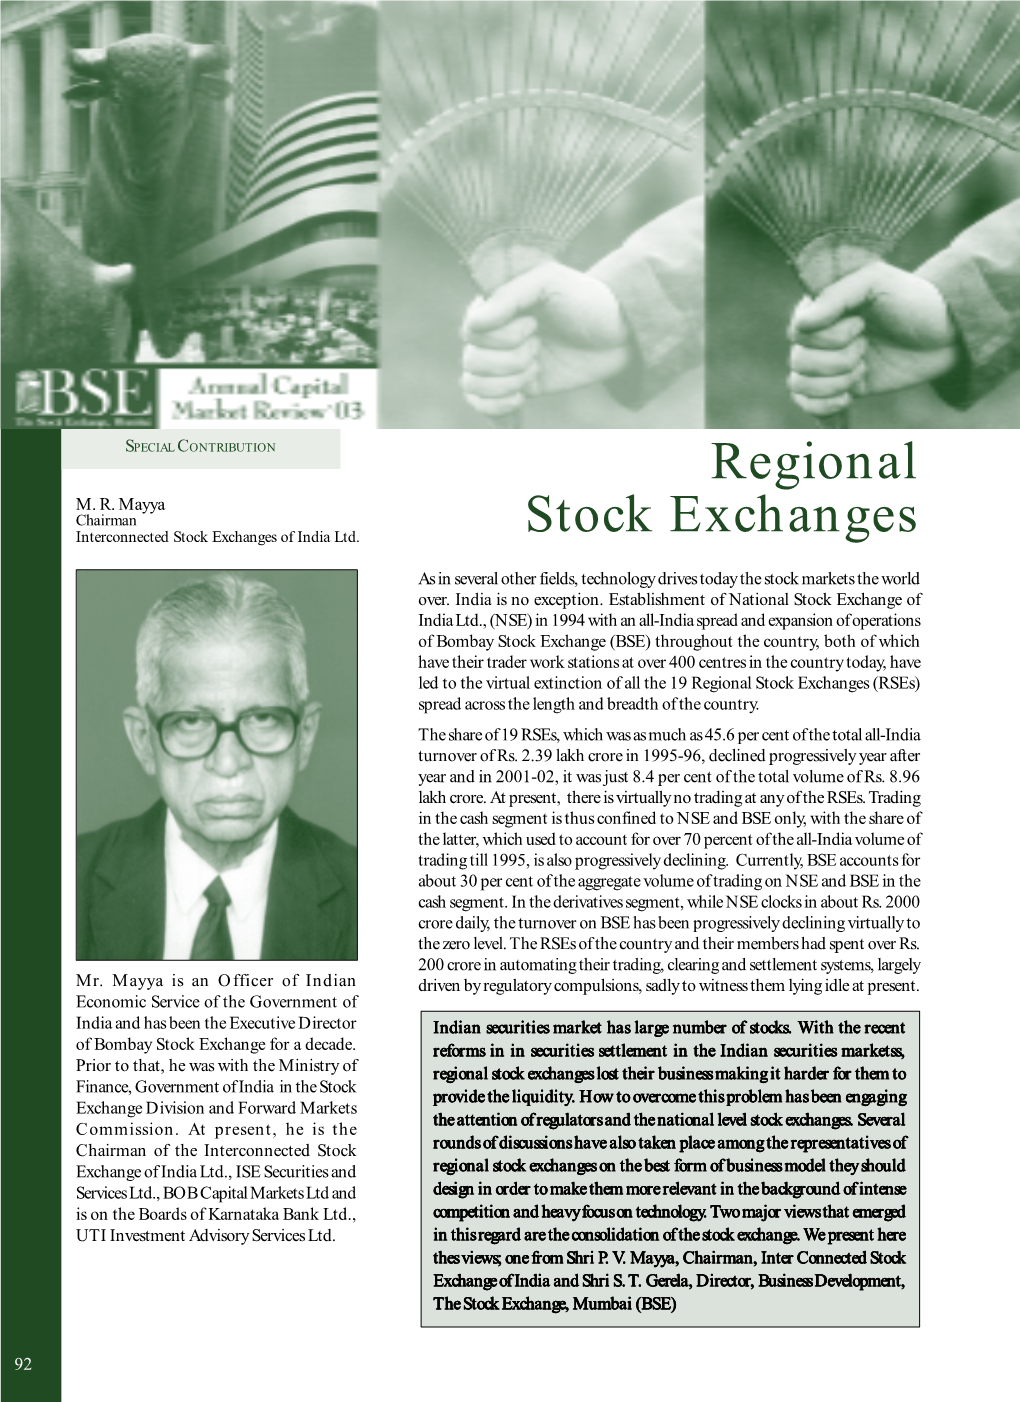 Regional Stock Exchanges (Rses) Spread Across the Length and Breadth of the Country